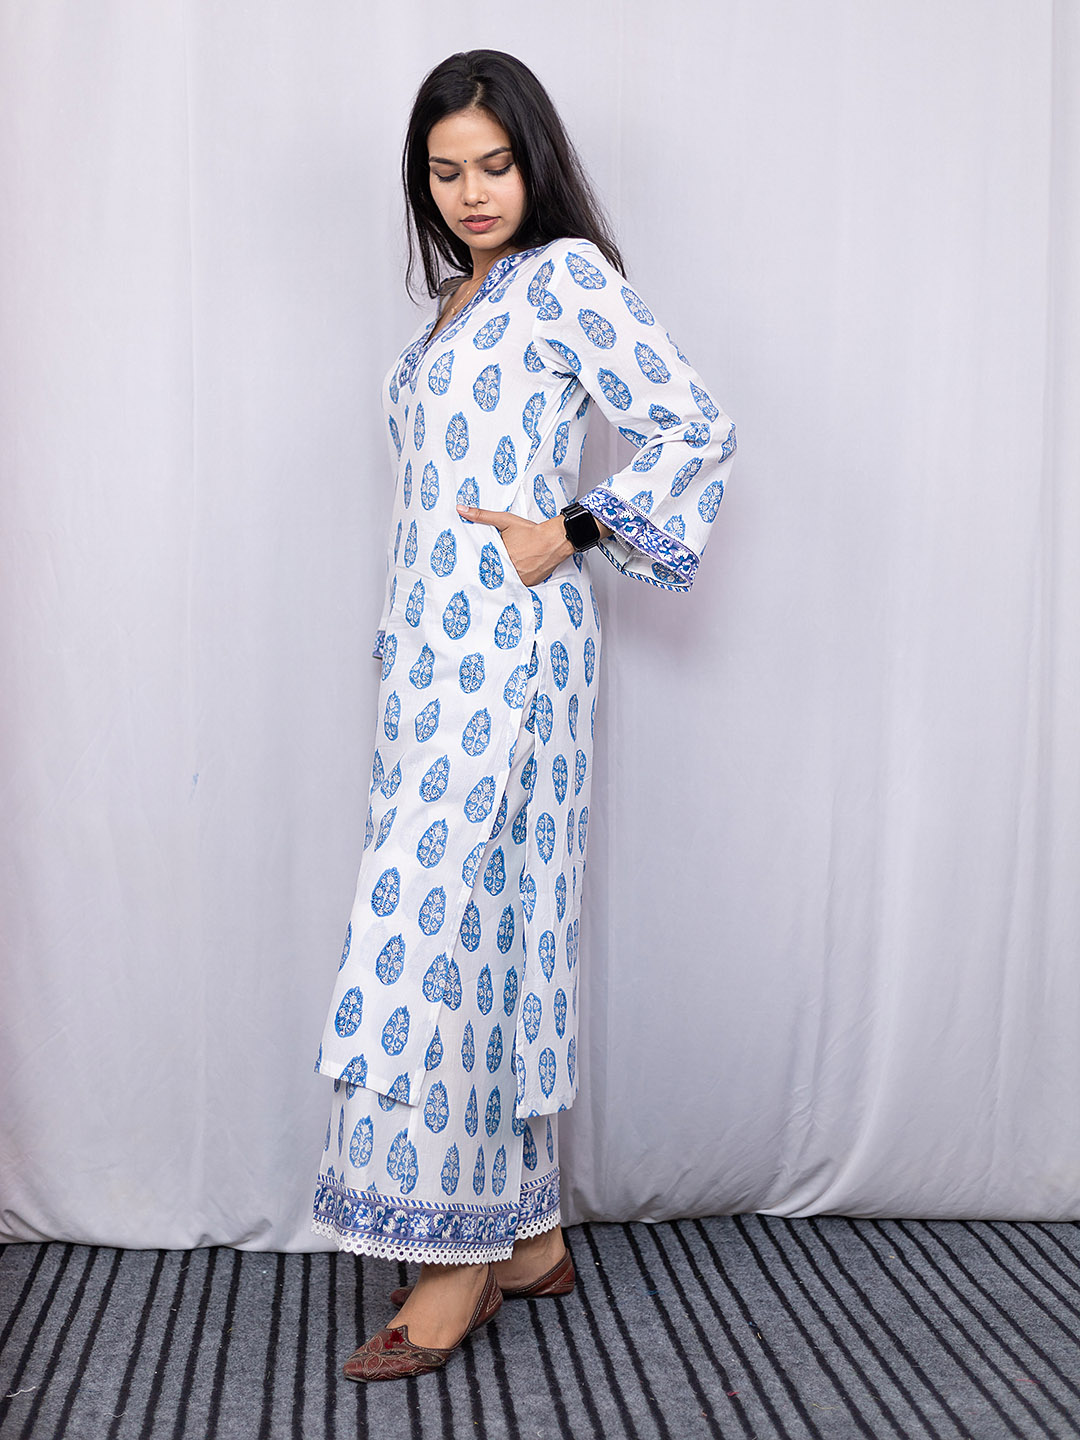 HandBlock Printed White and Blue Booty Kurta Set with Lace Detailing